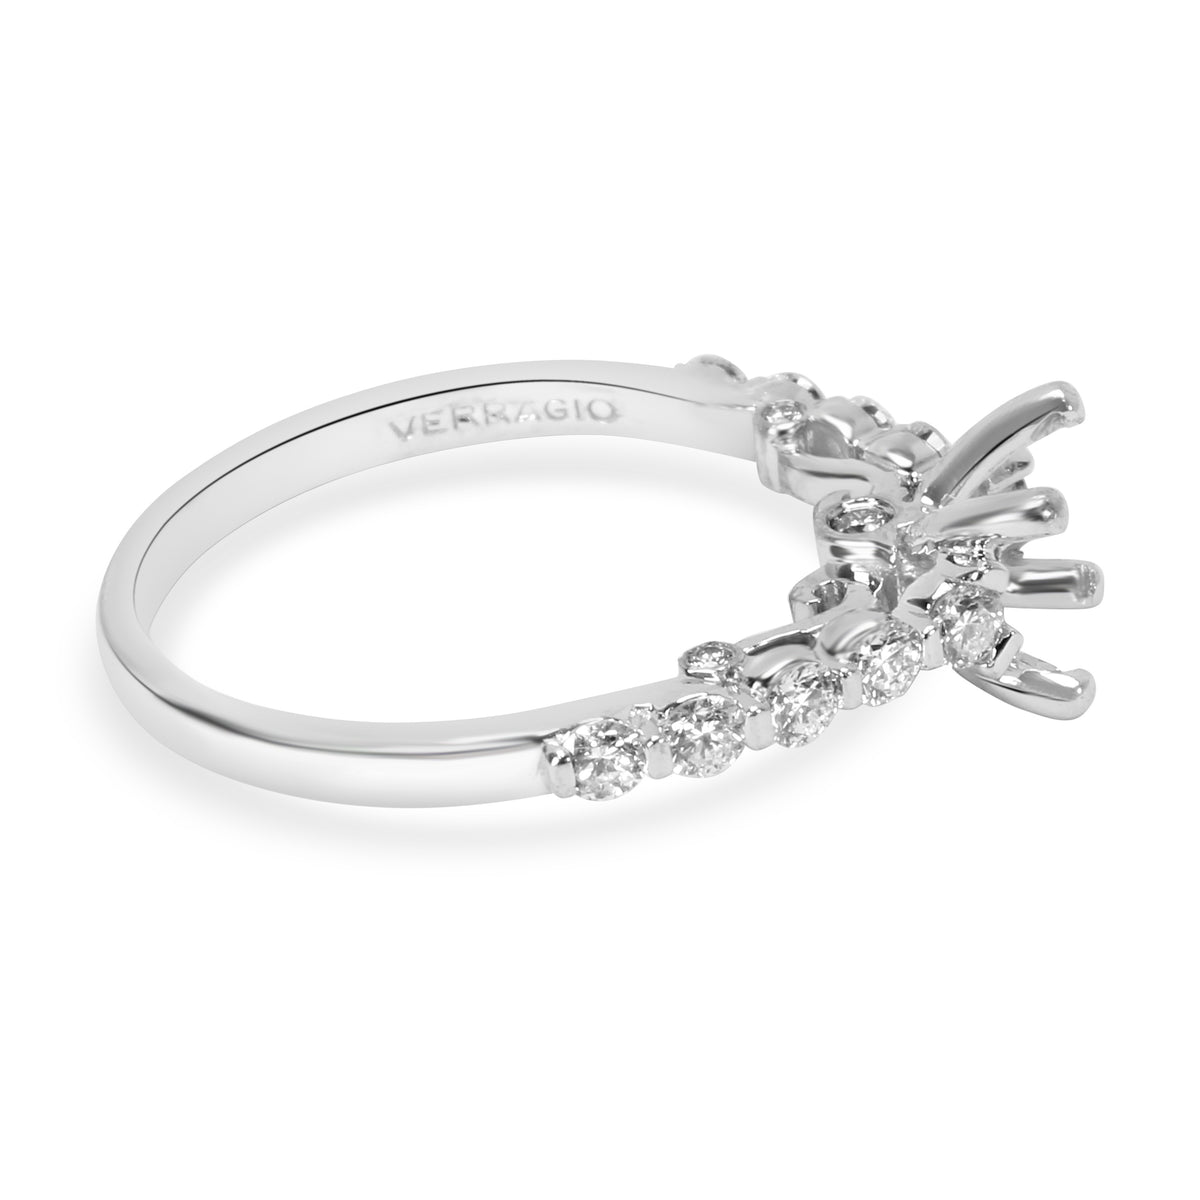 Verragio Cathedral Diamond Engagement Ring Setting in 18K White Gold 0.37CTW